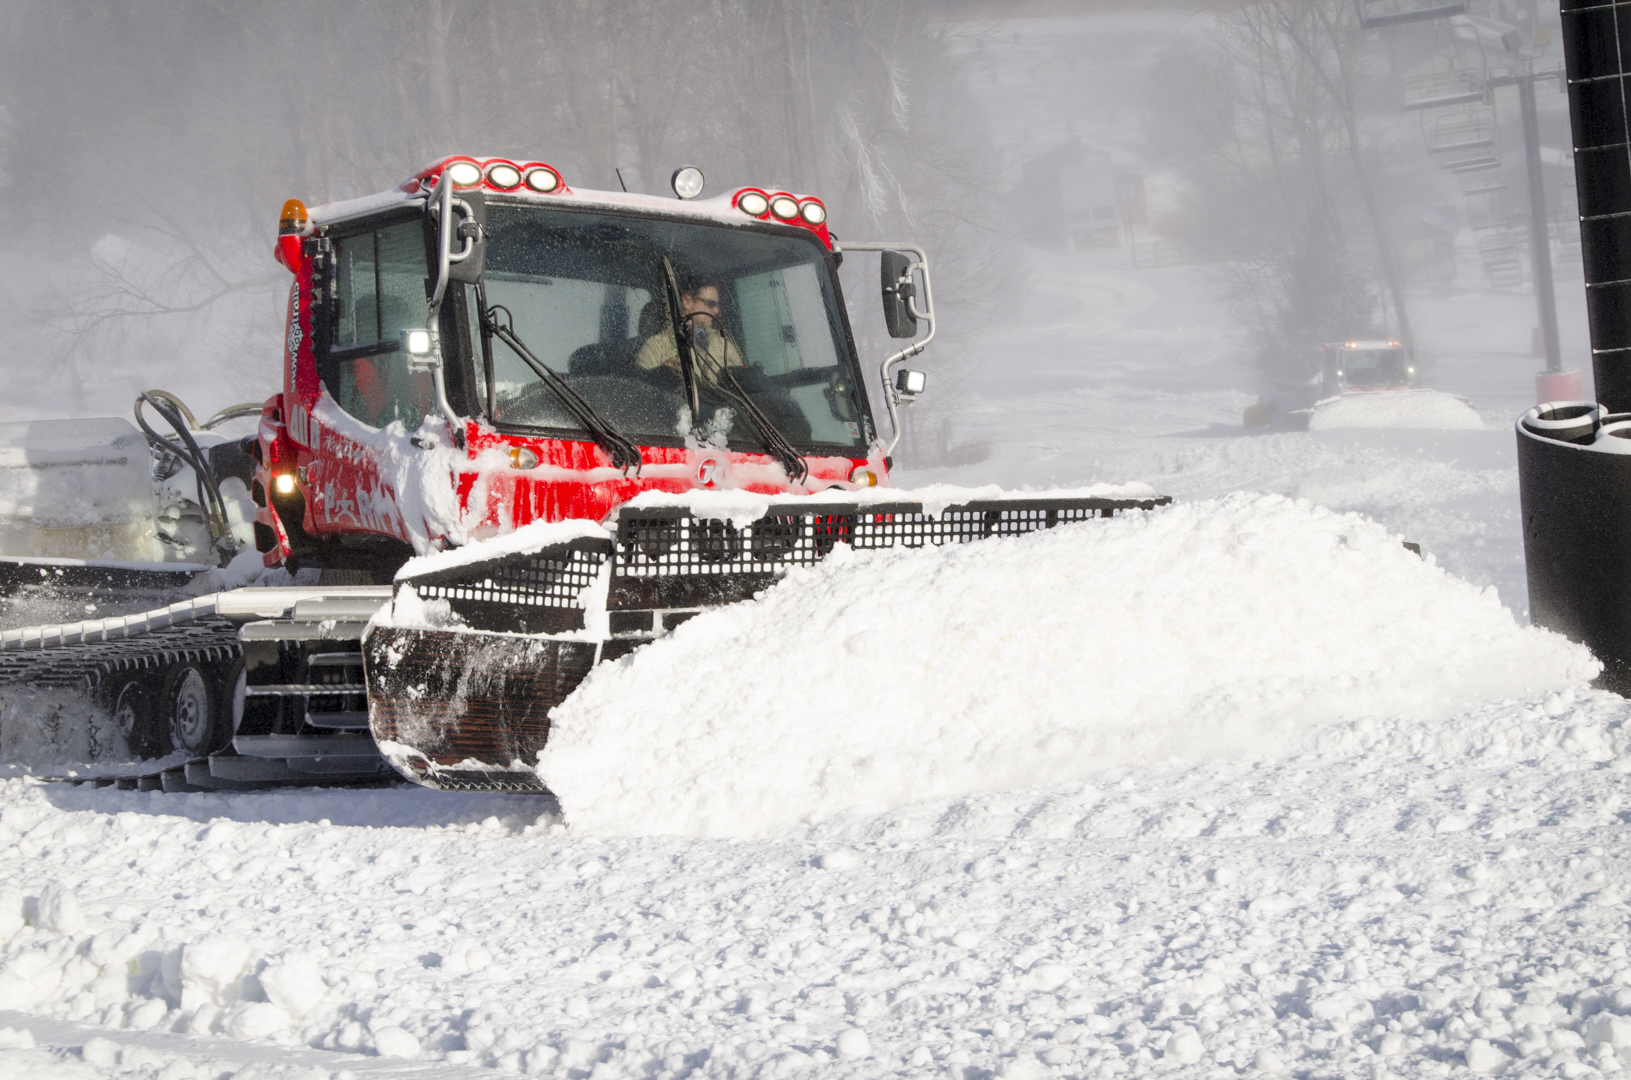 Pisten Bully Snow Cat pushing fresh snow in Mogul Area at Snow Trails